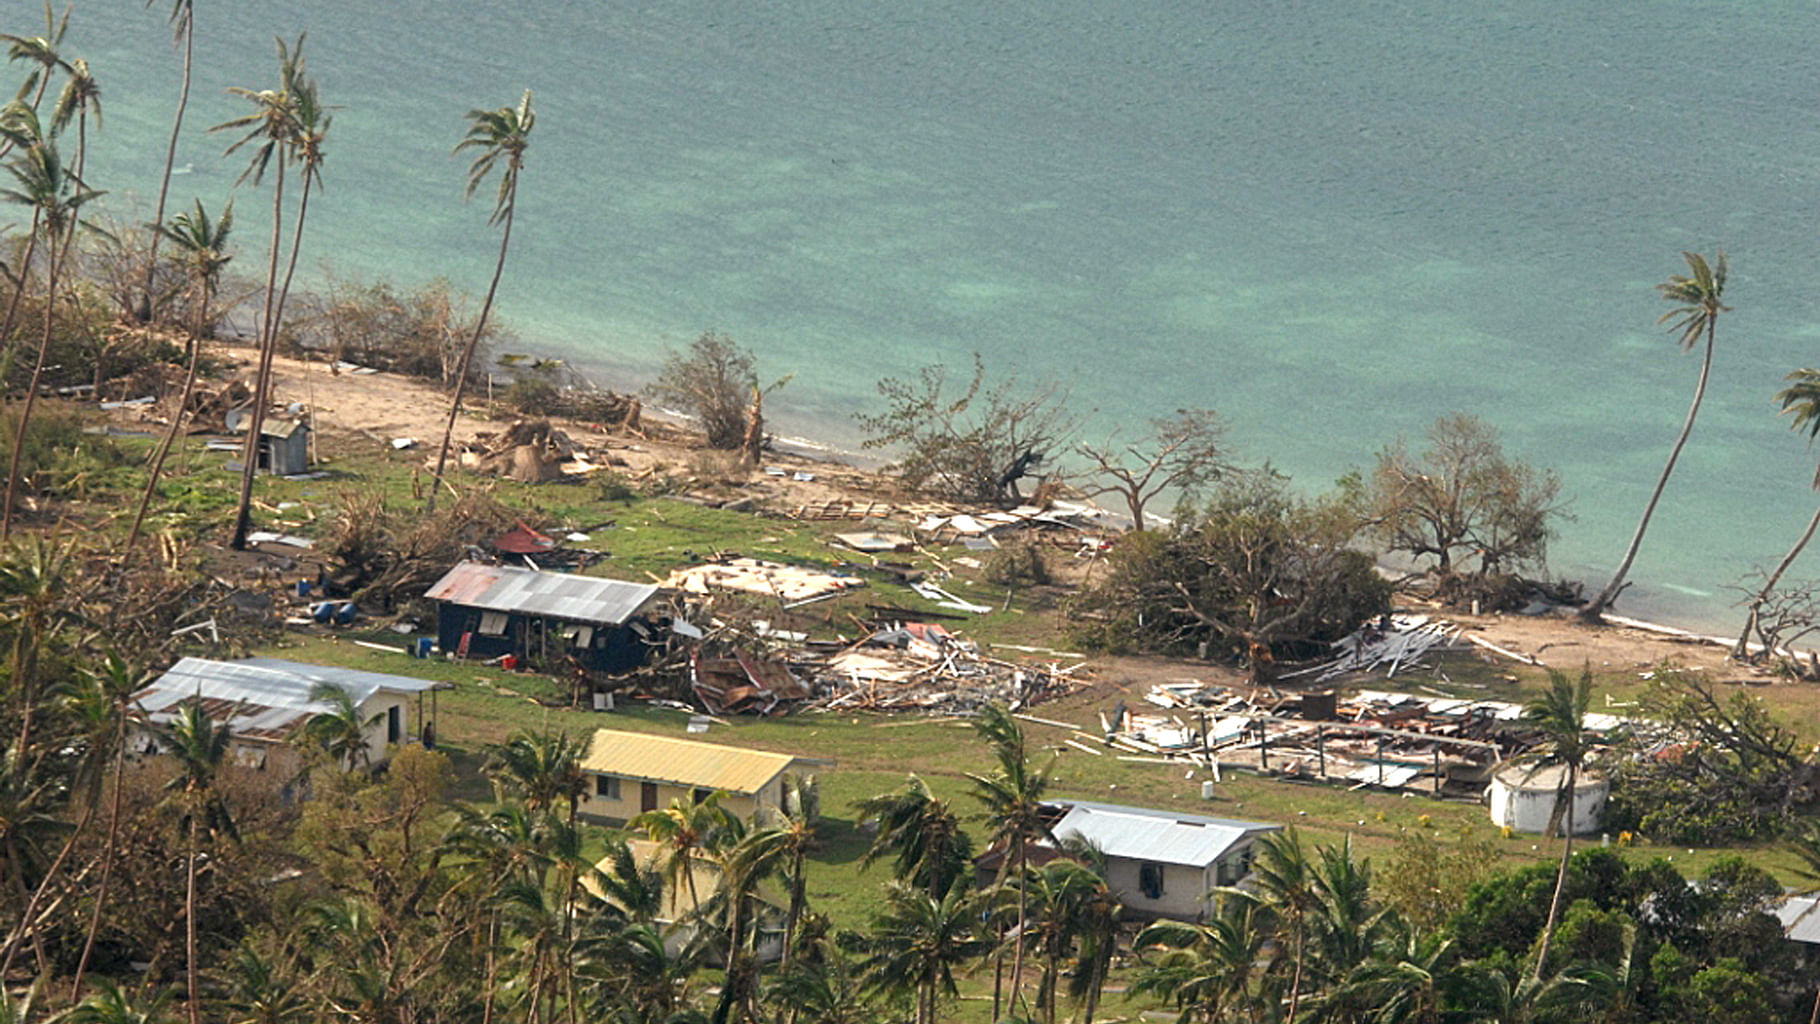 Aerial photo of debris  scattered around damaged buildings at Susui village in Fiji, after Cyclone Winston tore through the island (Photo: AP)